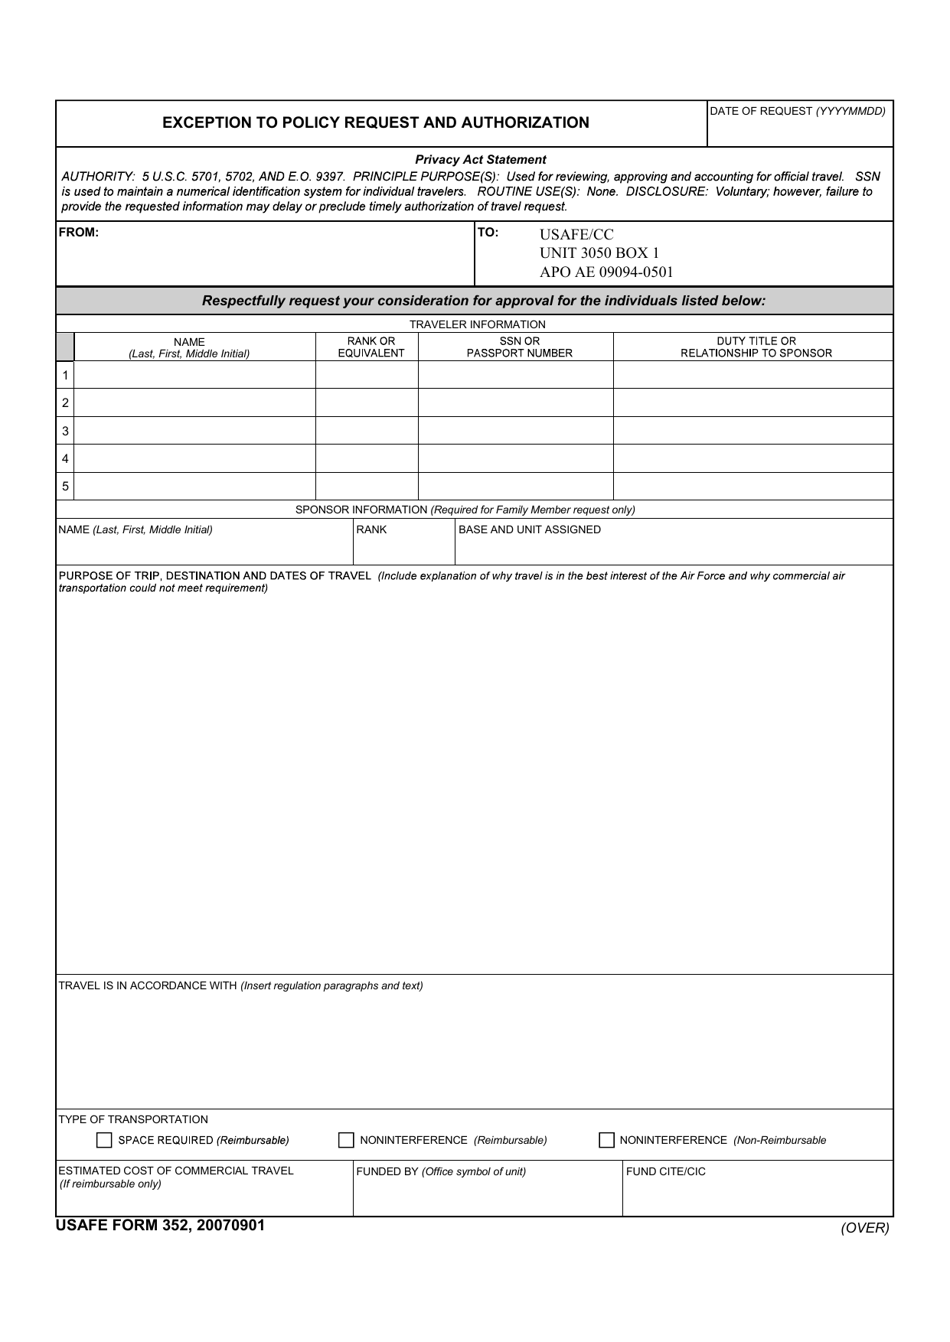 usafe-form-352-download-fillable-pdf-or-fill-online-exception-to-policy